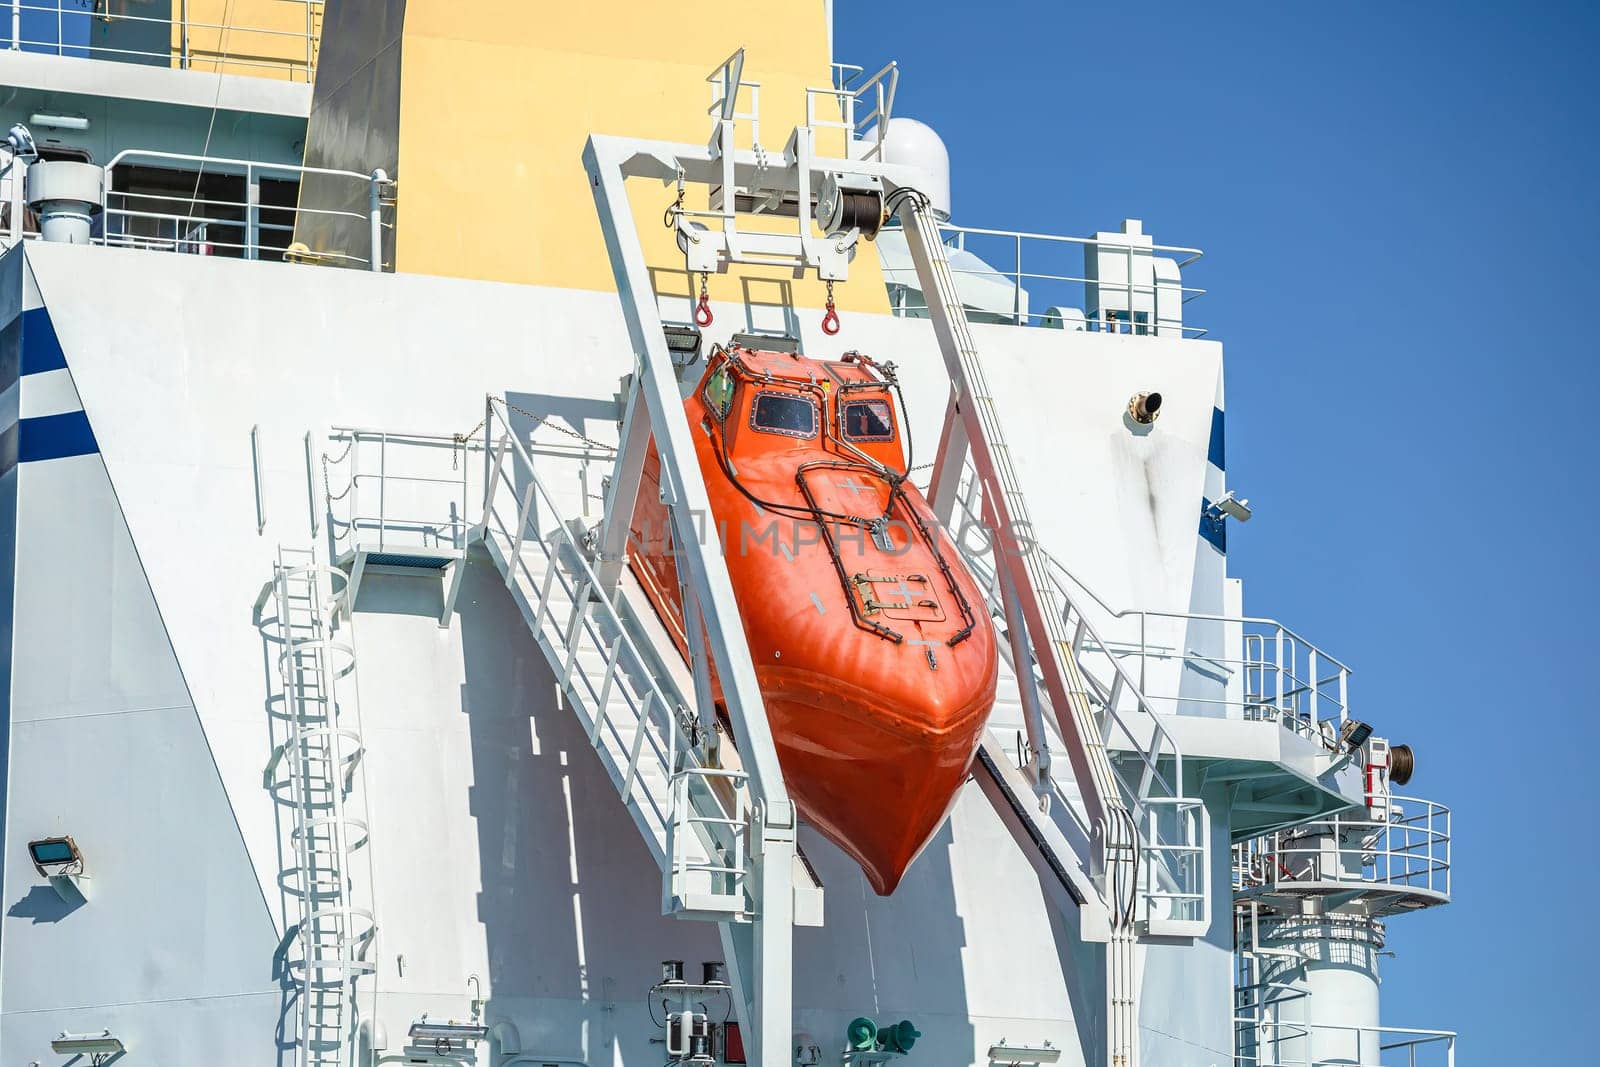 Lifeboat on large ship view, maritime safety equipment